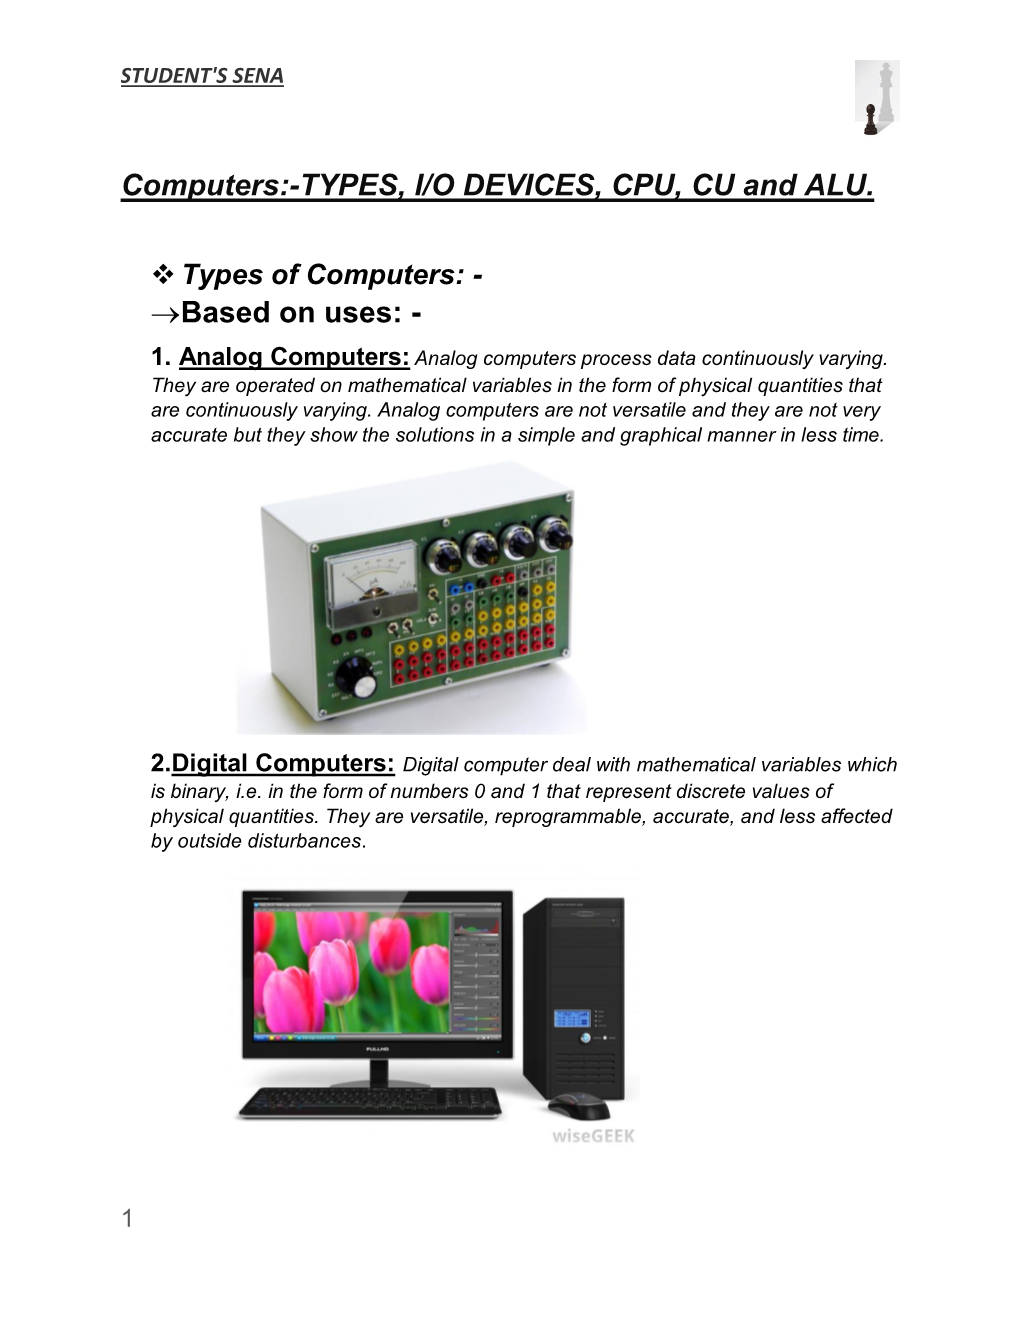 Computers:-TYPES, I/O DEVICES, CPU, CU and ALU. Based on Uses